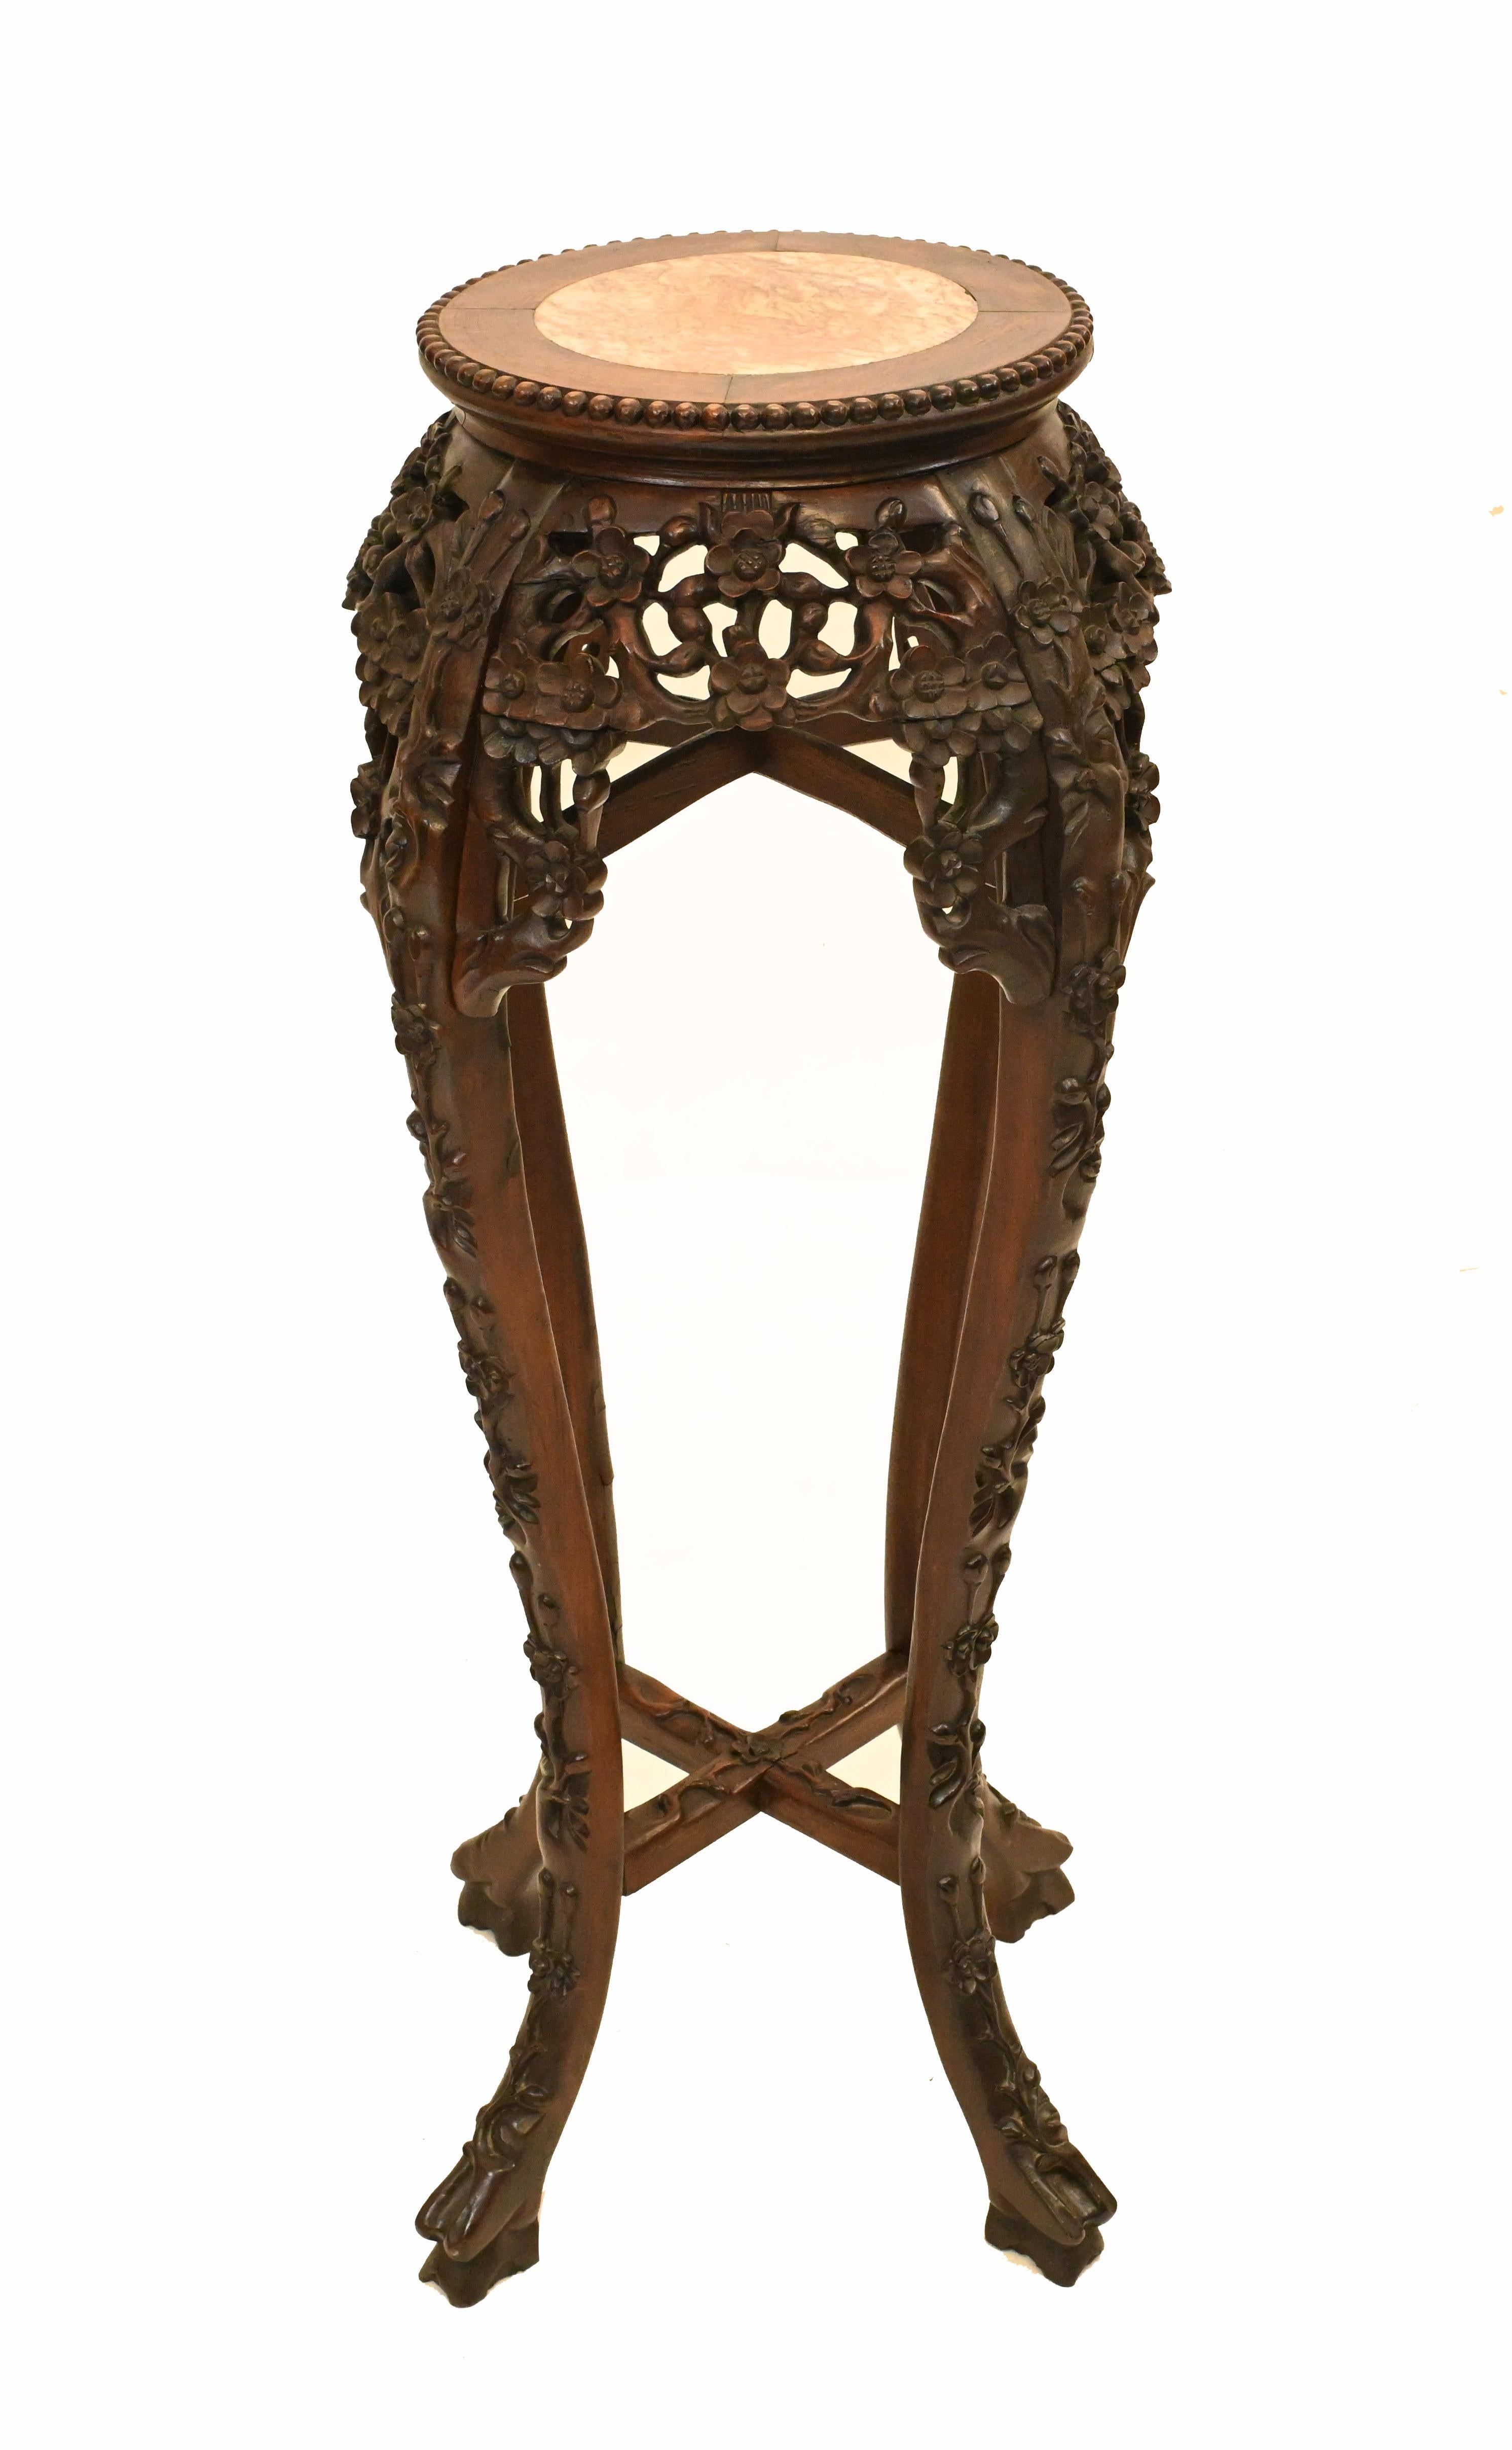 Wonderful antique Chinese pedestal stand.
Carved from hardwood we date this to circa 1840.
Great for displaying decorative pieces such as busts and urns.
Offered in great shape ready for home use right away.
We ship to every corner of the planet.